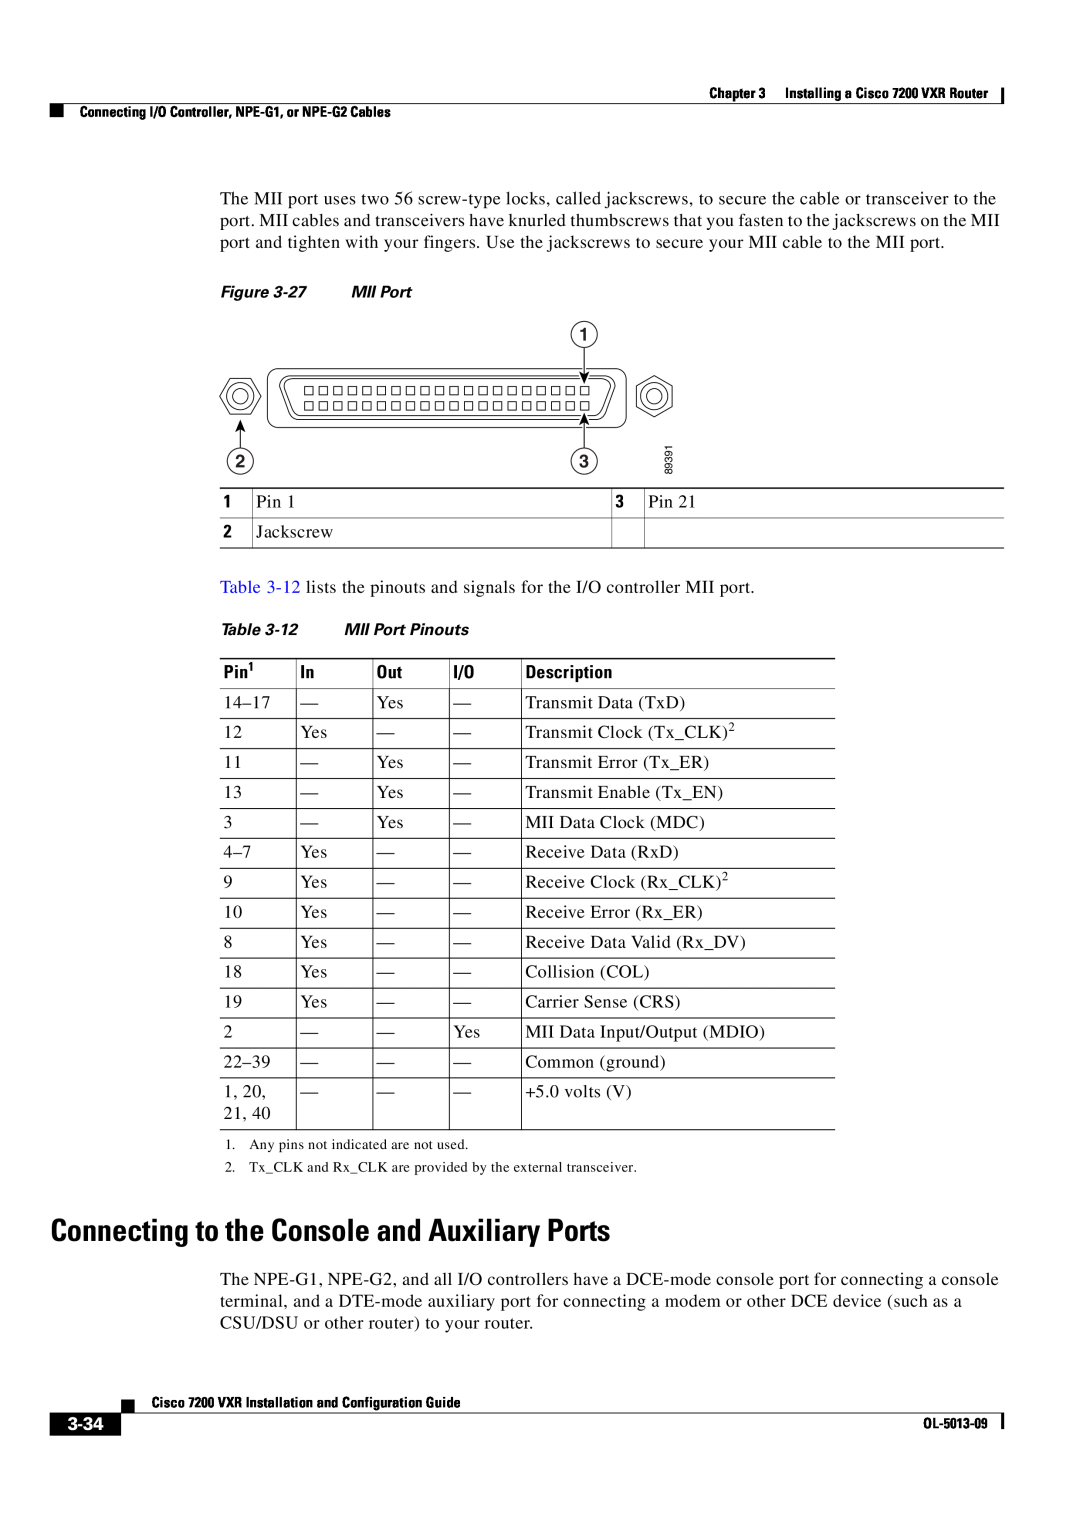 Cisco Systems 7200 VXR manual Connecting to the Console and Auxiliary Ports, 3-34, MII Port Pinouts 